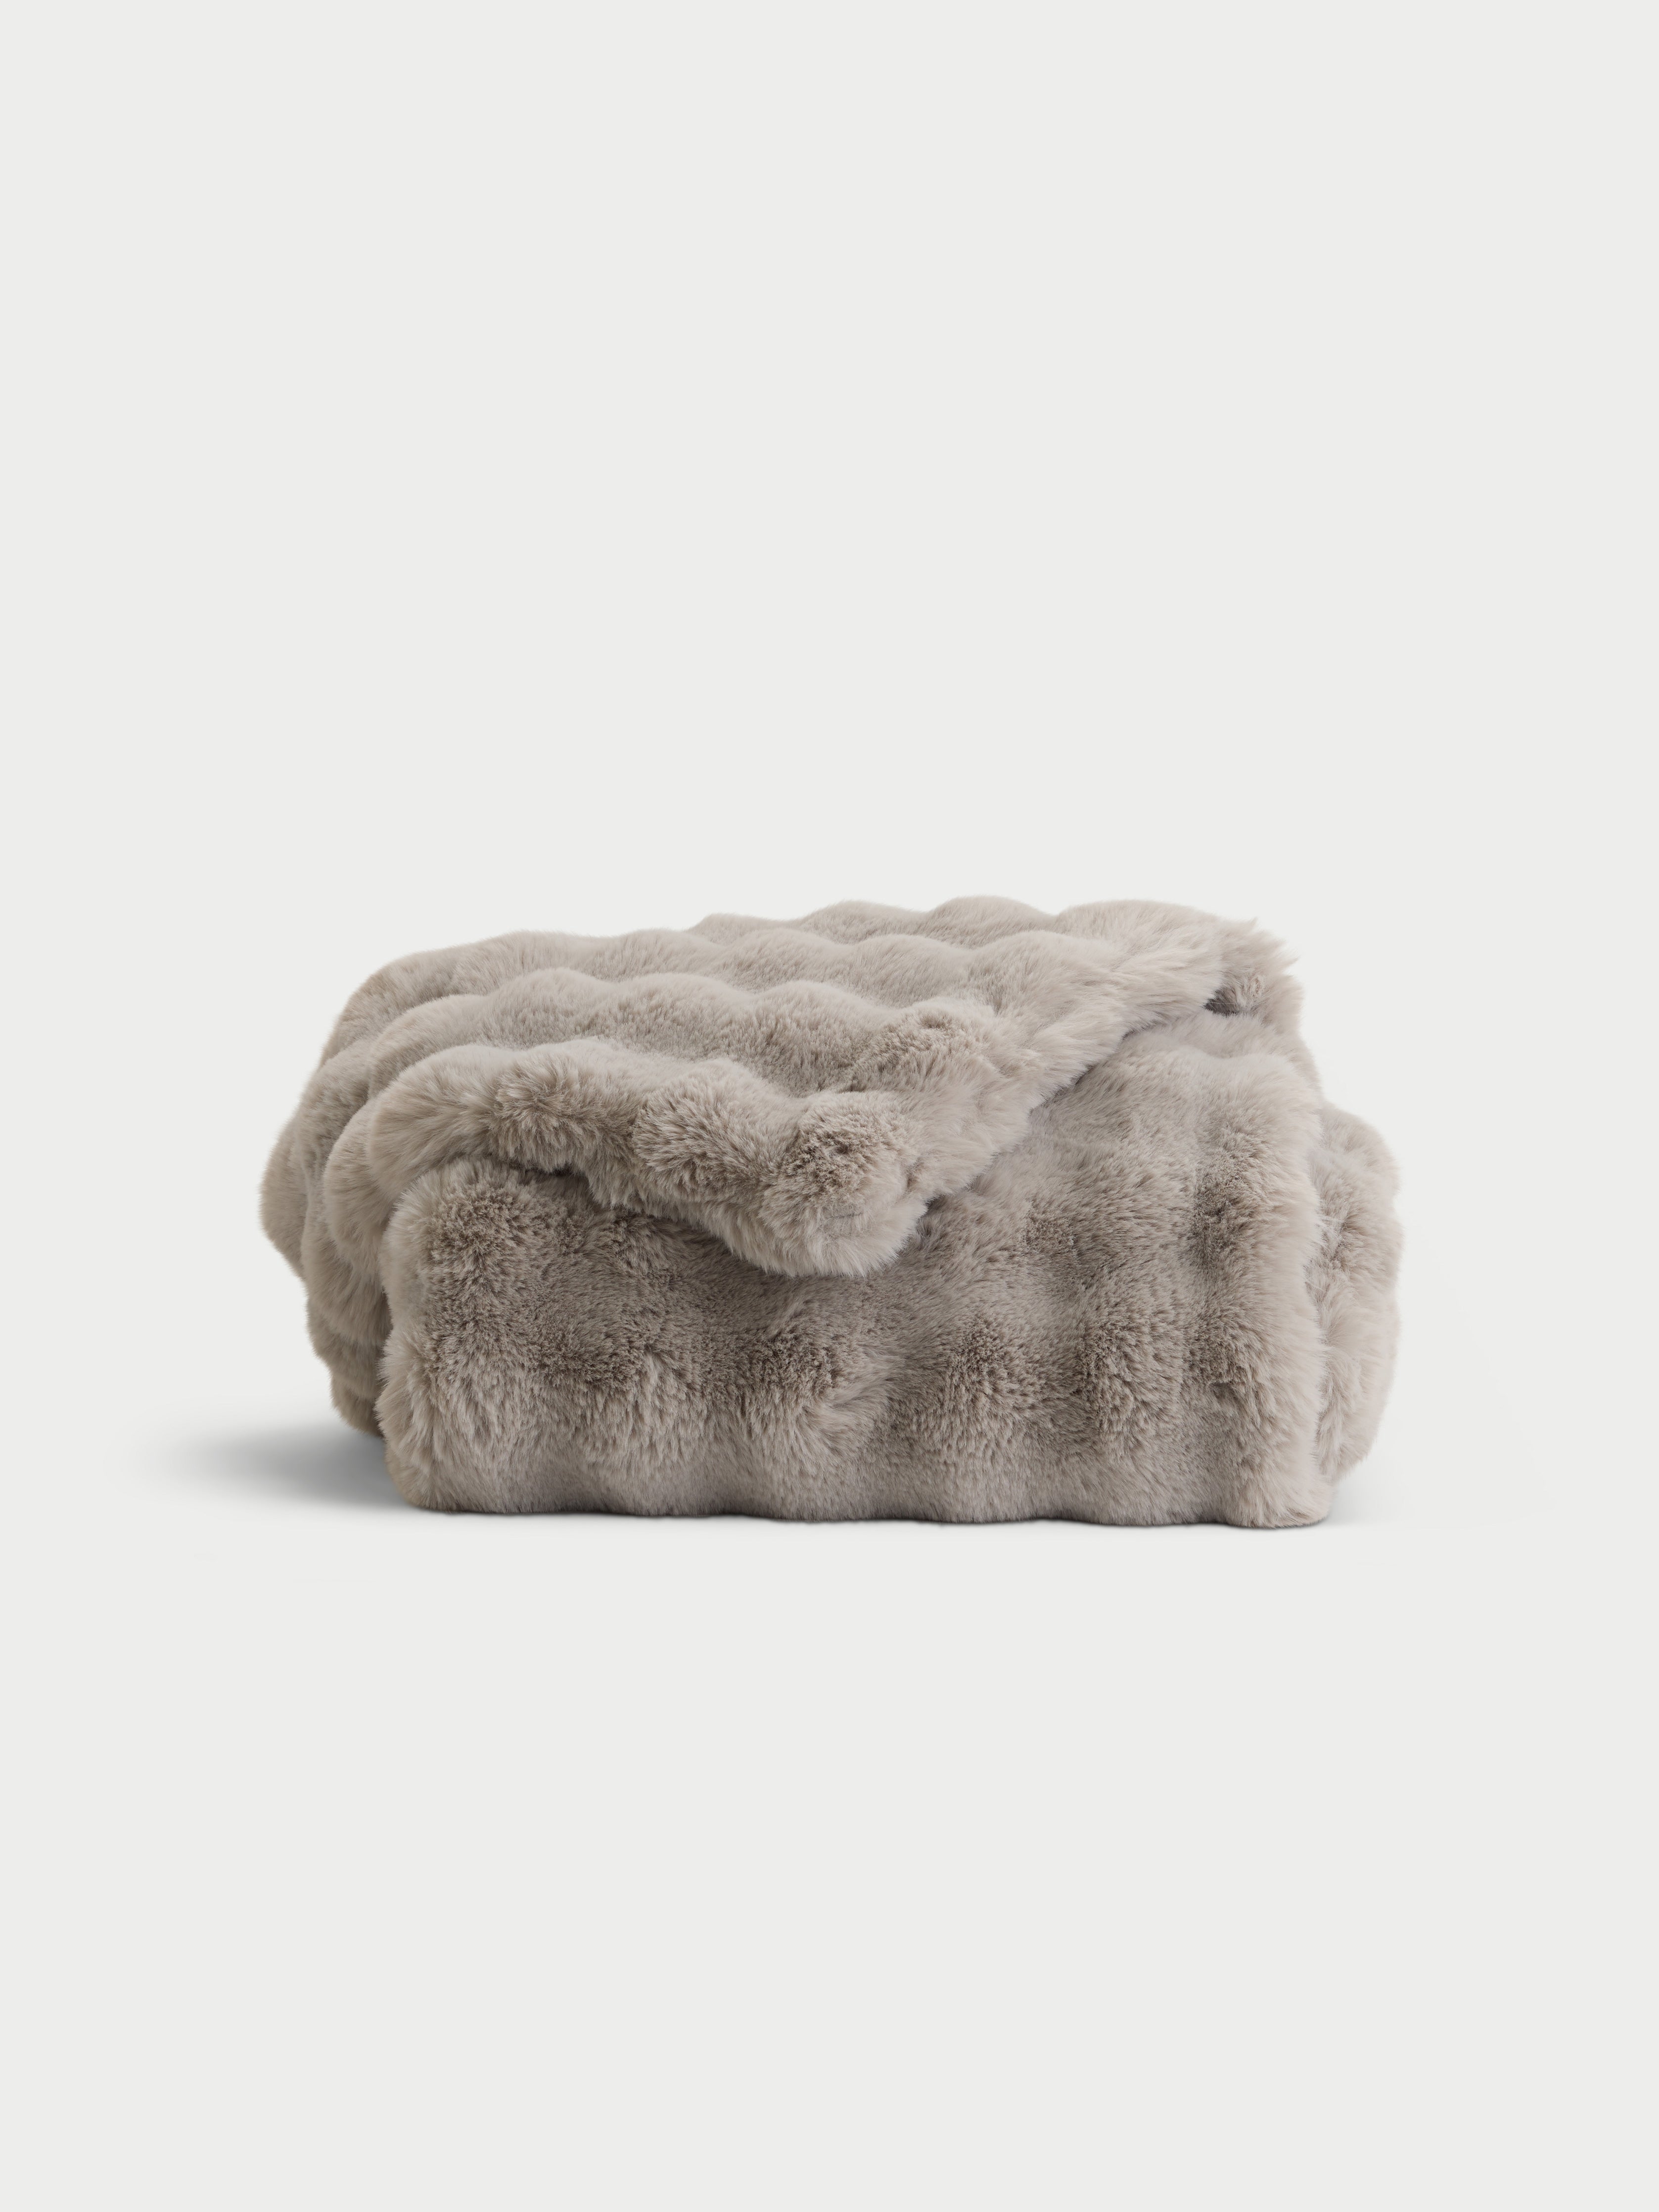 Light grey lush faux fur blanket folded with white background |Color:Light Grey